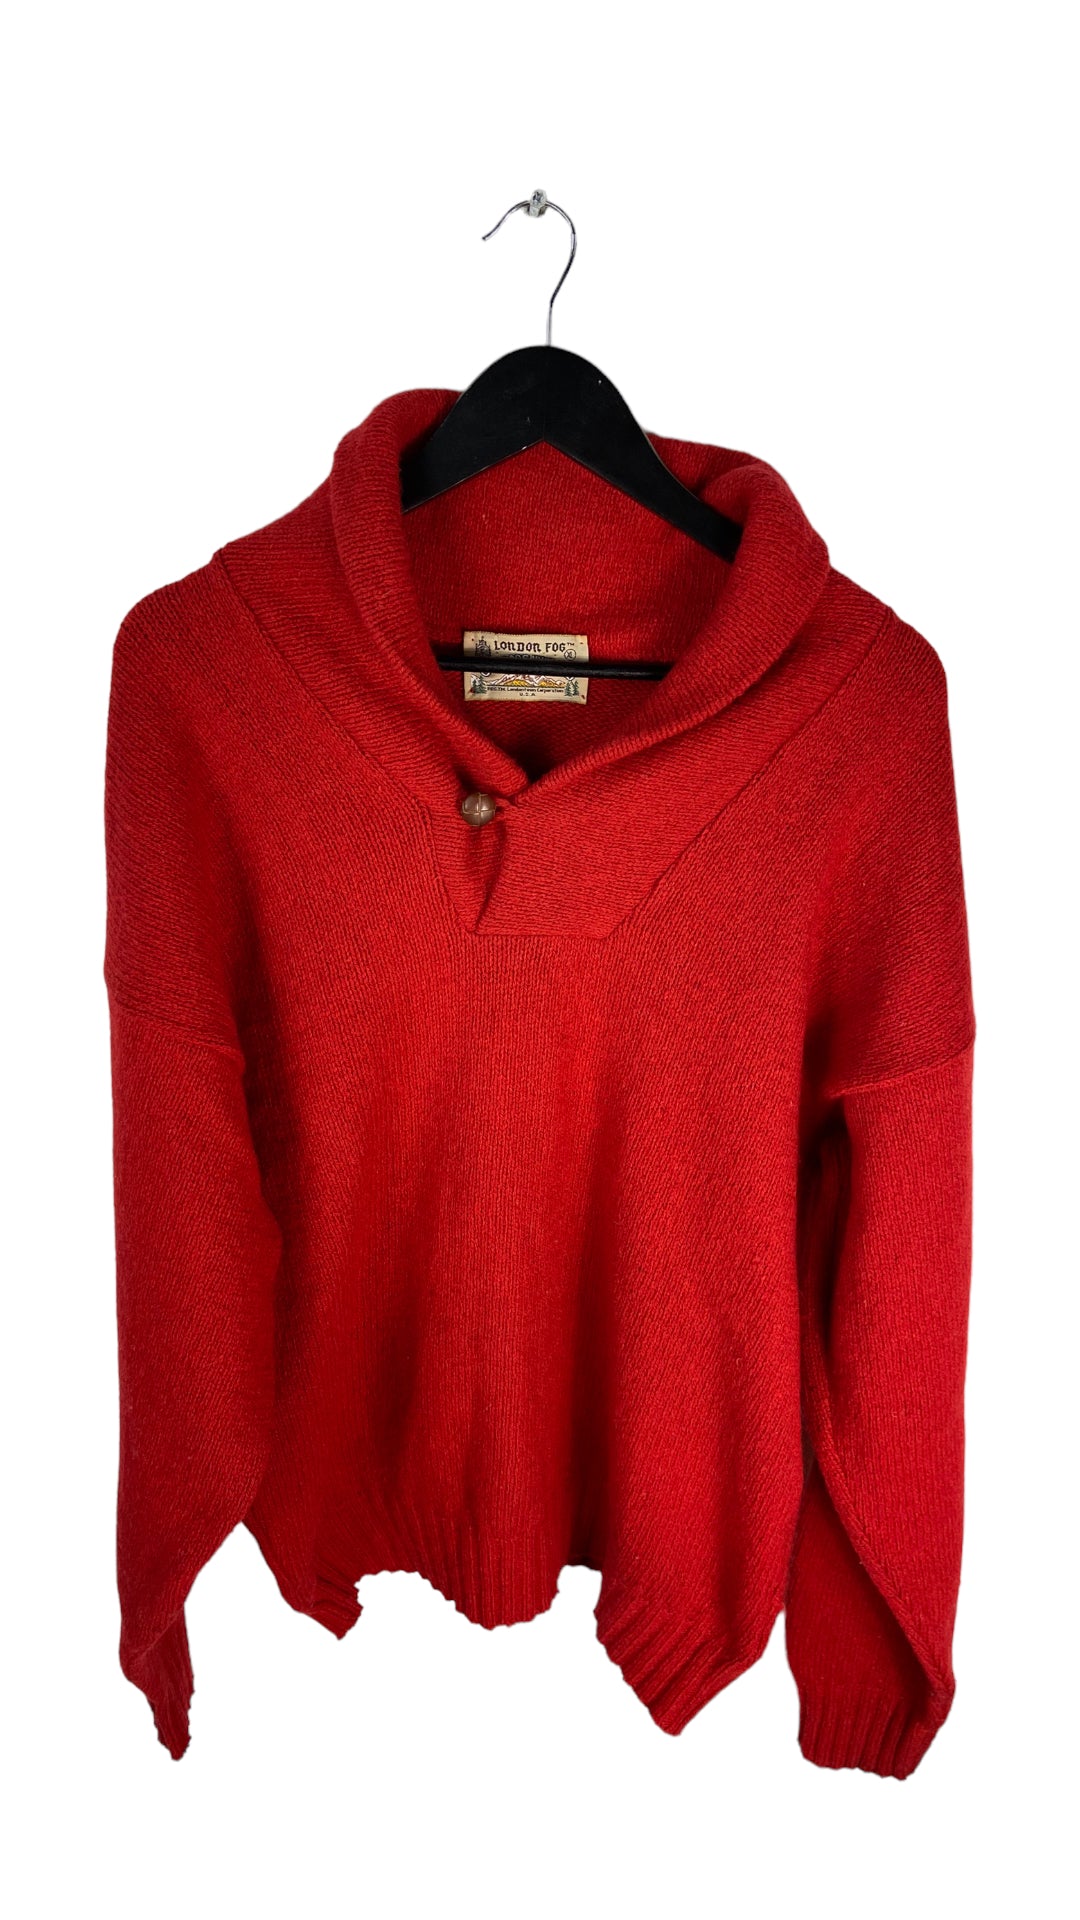 Load image into Gallery viewer, VTG London Fog Unlimited Red Cardigan Sz XL
